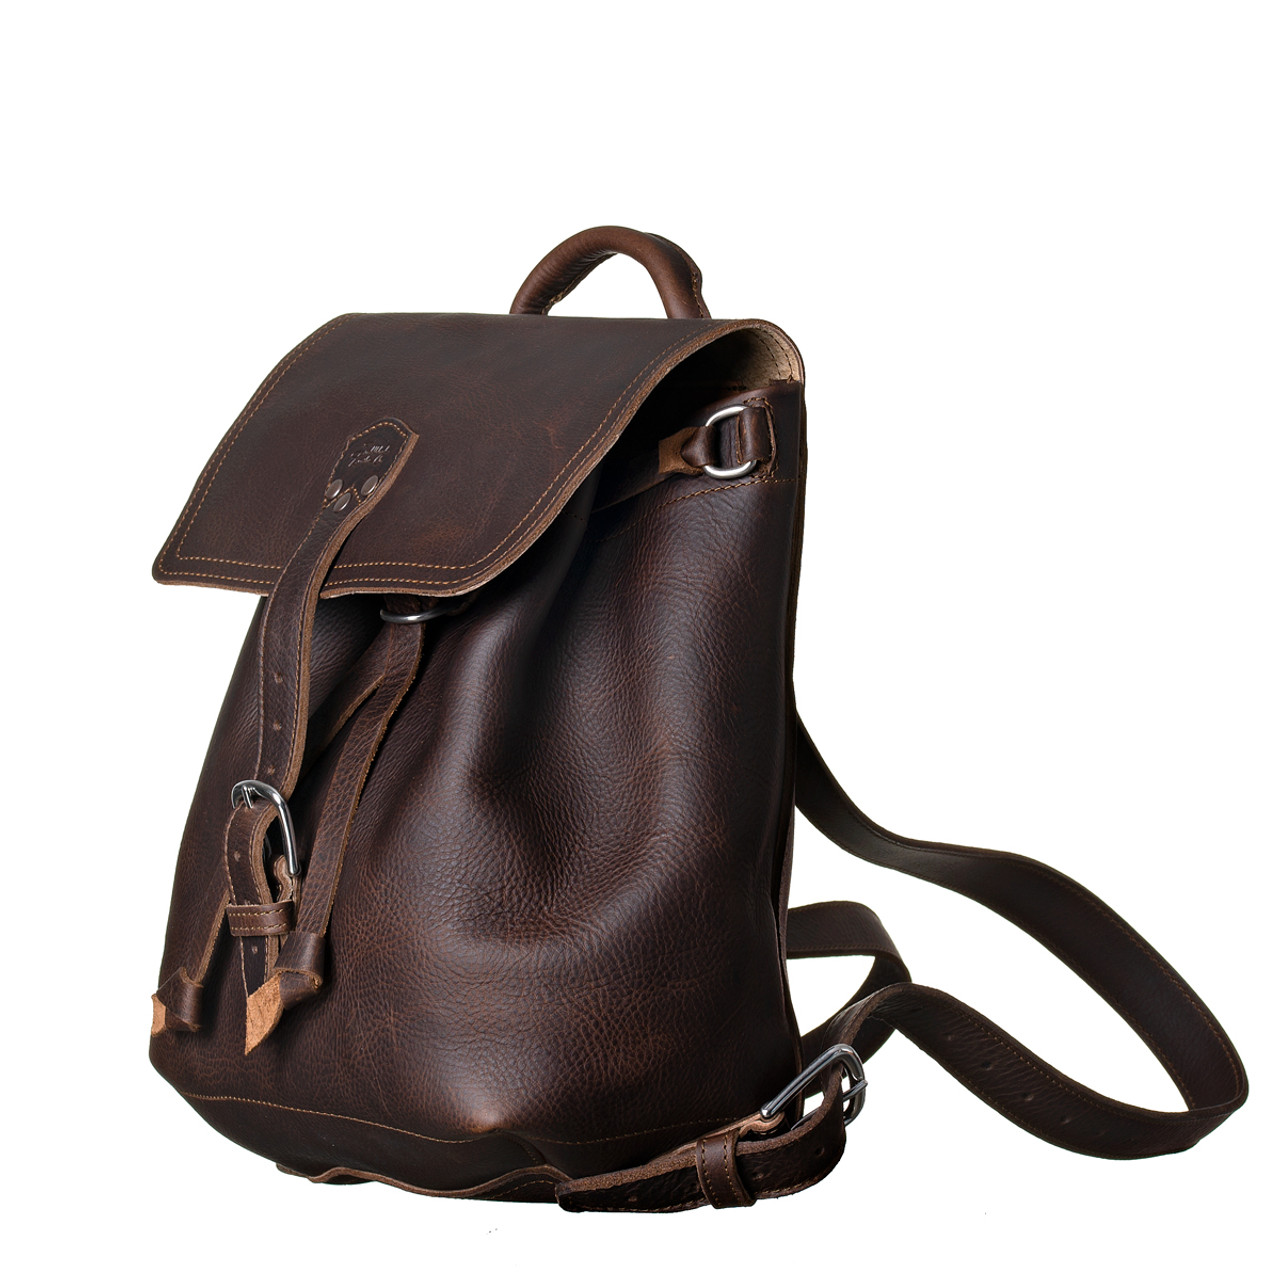 Leather Backpack With Straw Effect in Black and Brown Leather 